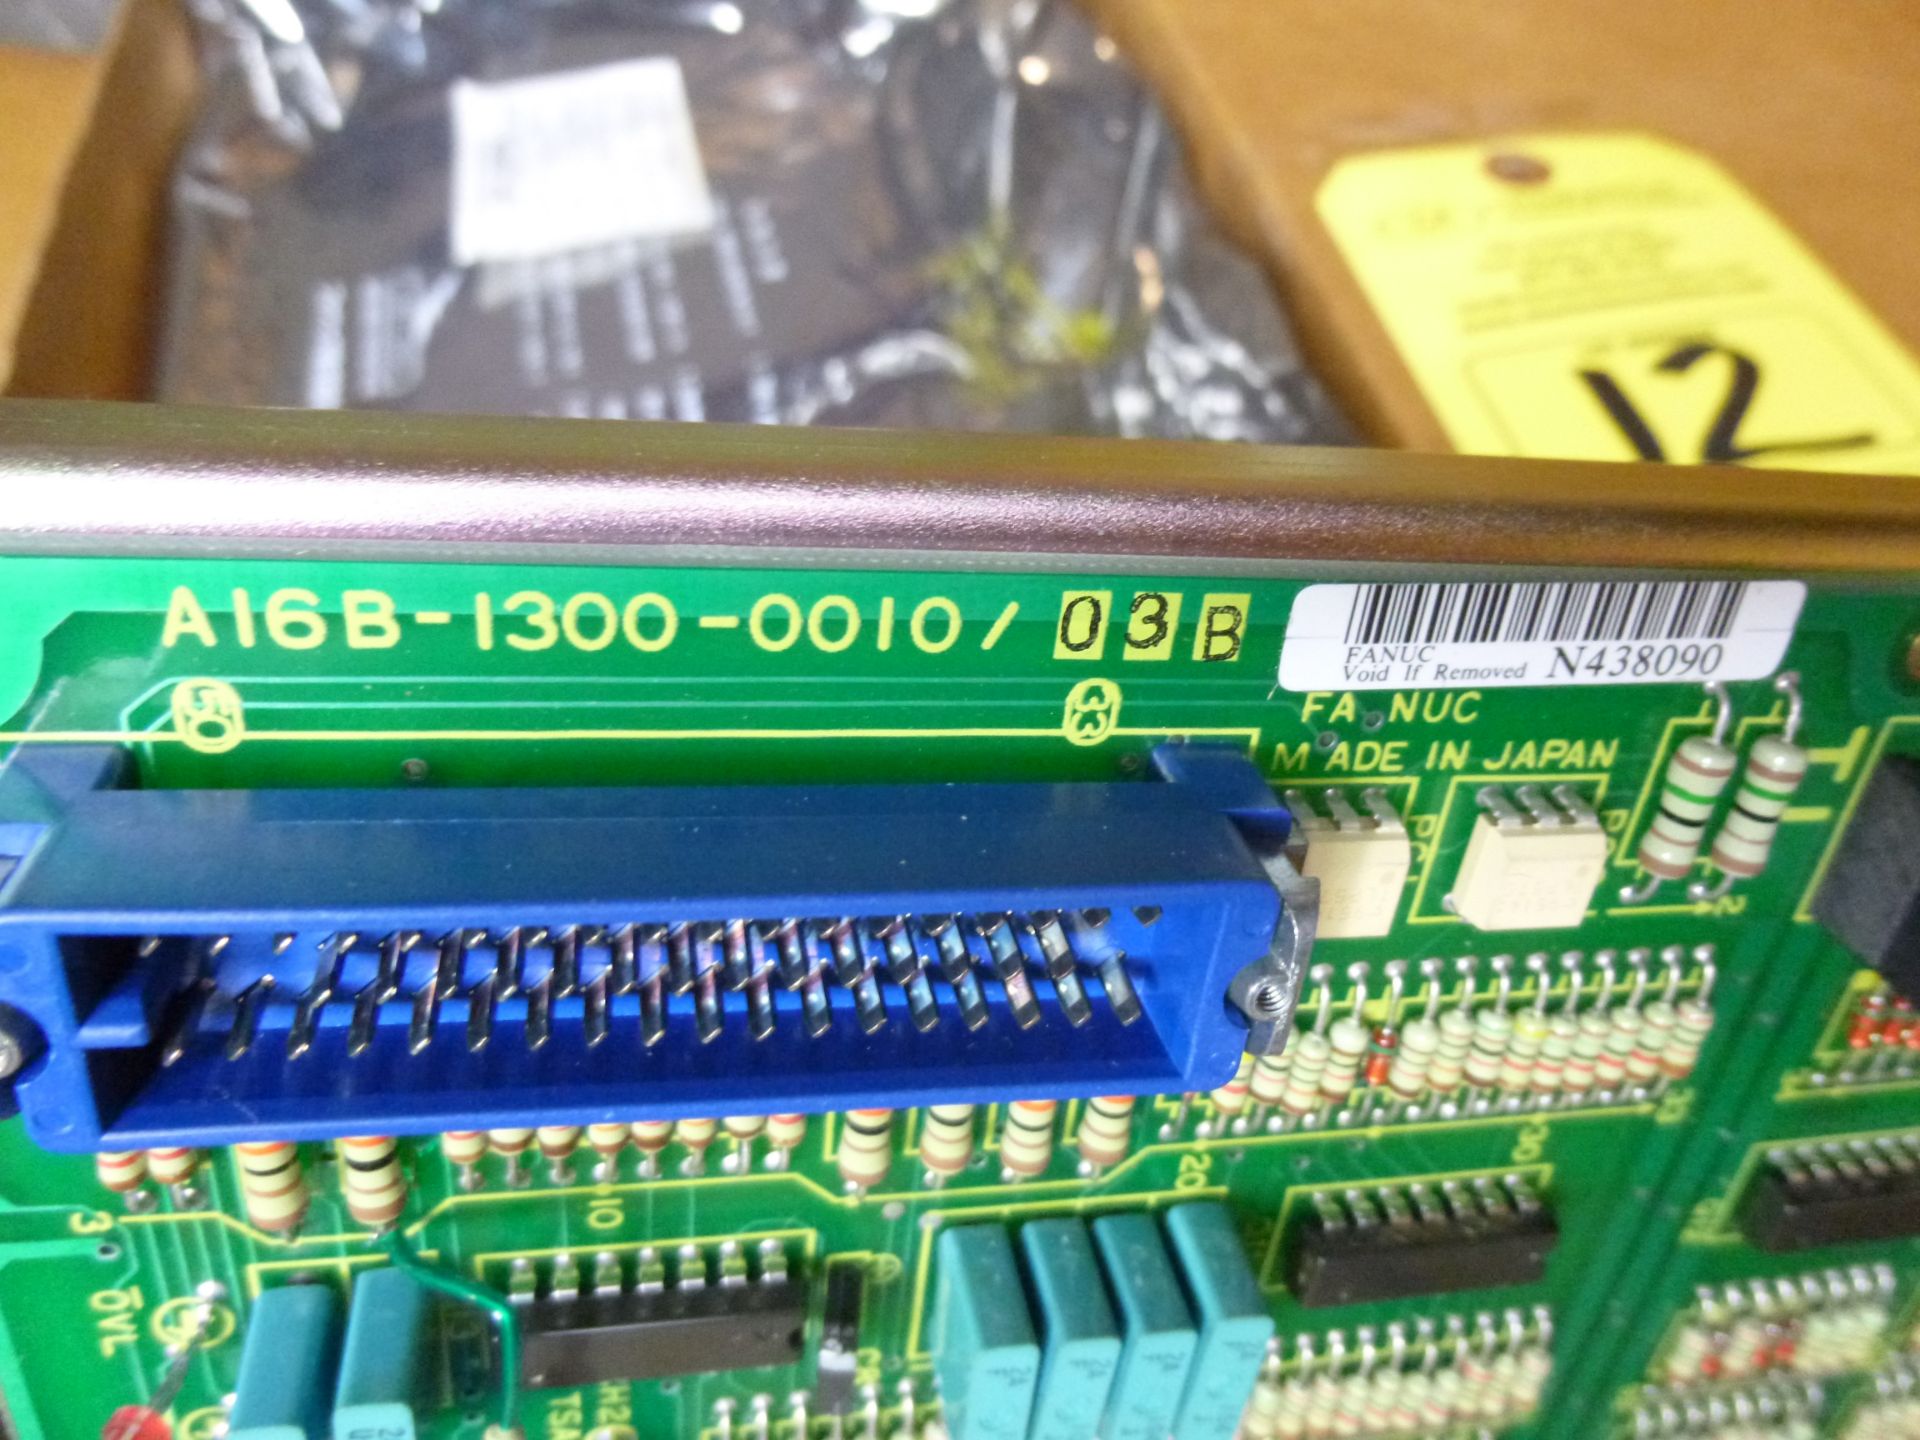 Fanuc Axes Control Board A16B-1300-0010/03B (new in box) Shipping can be prepared for either - Image 2 of 2